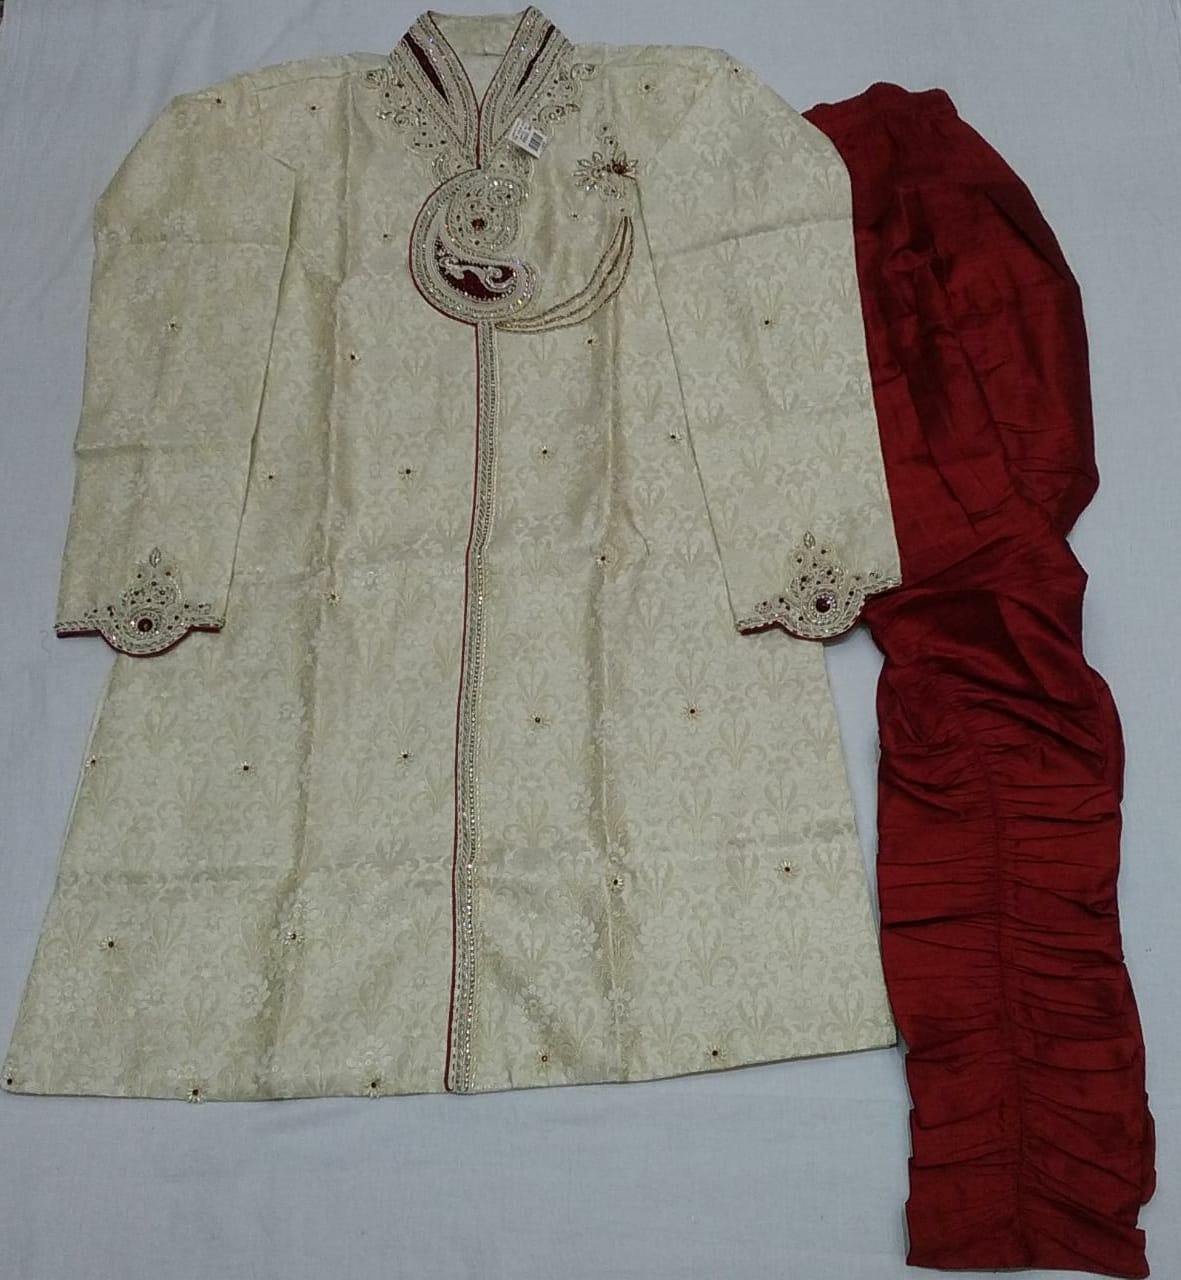 118830 A $222.00 MENS SHERWANI WITH BRITCHES PANT SIZE 40 (WEDDING SUIT)